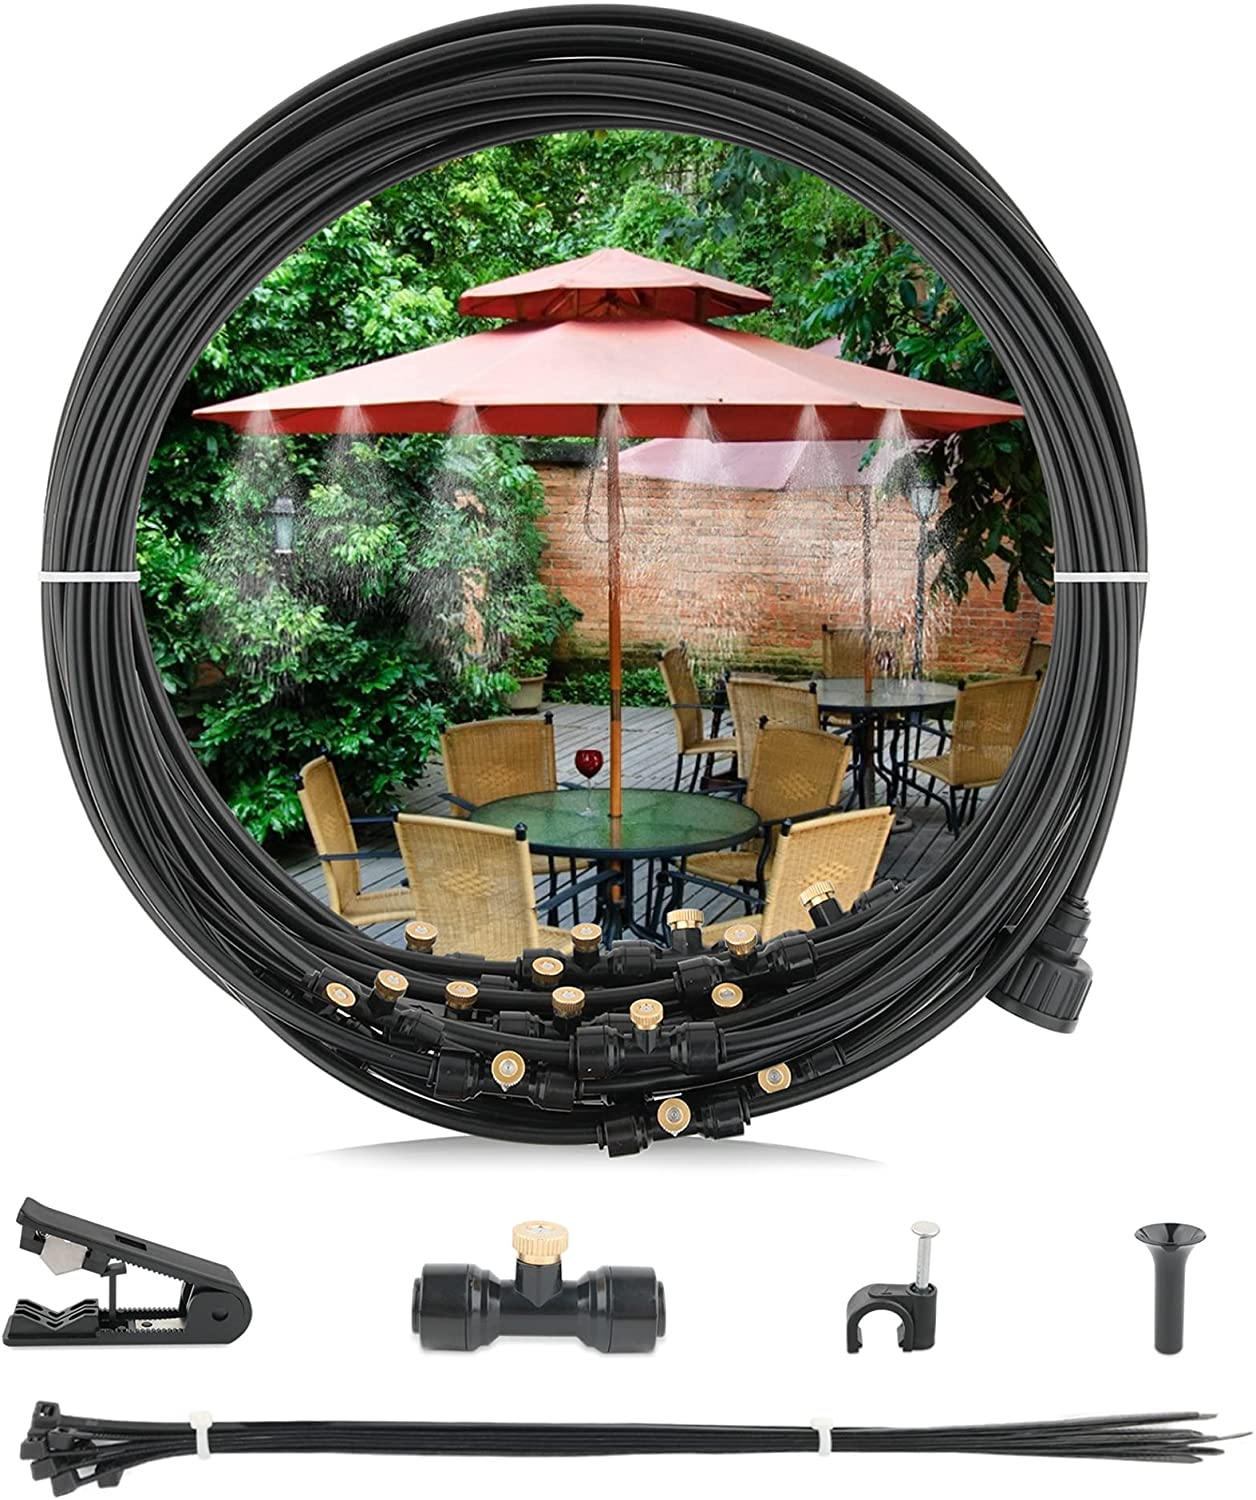 Misting Cooling System,50 Ft Misting Line,16 Brass Mist Nozzles + Adapter (3/4”), Outdoor Mister System for Patio Garden